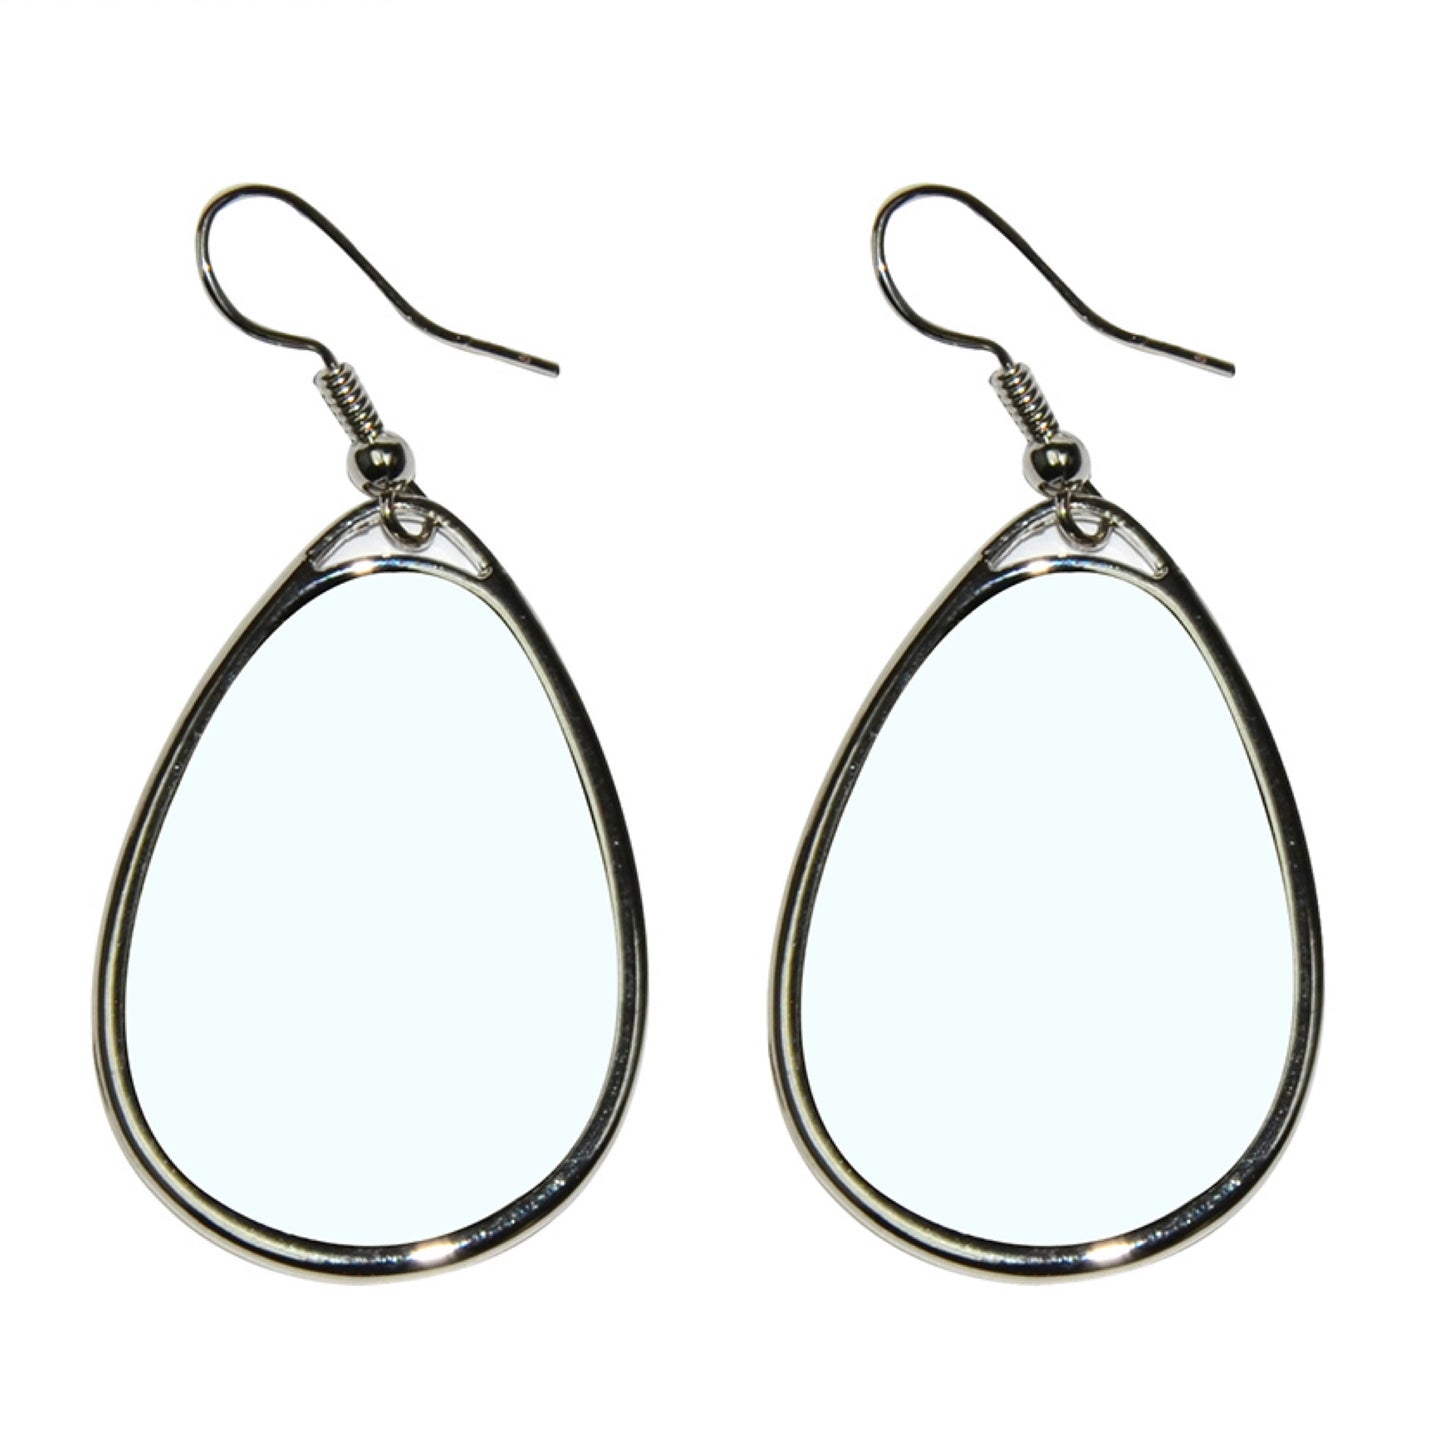 Water Drop Necklaces & Earrings - Carolina Blanks  And More LLC